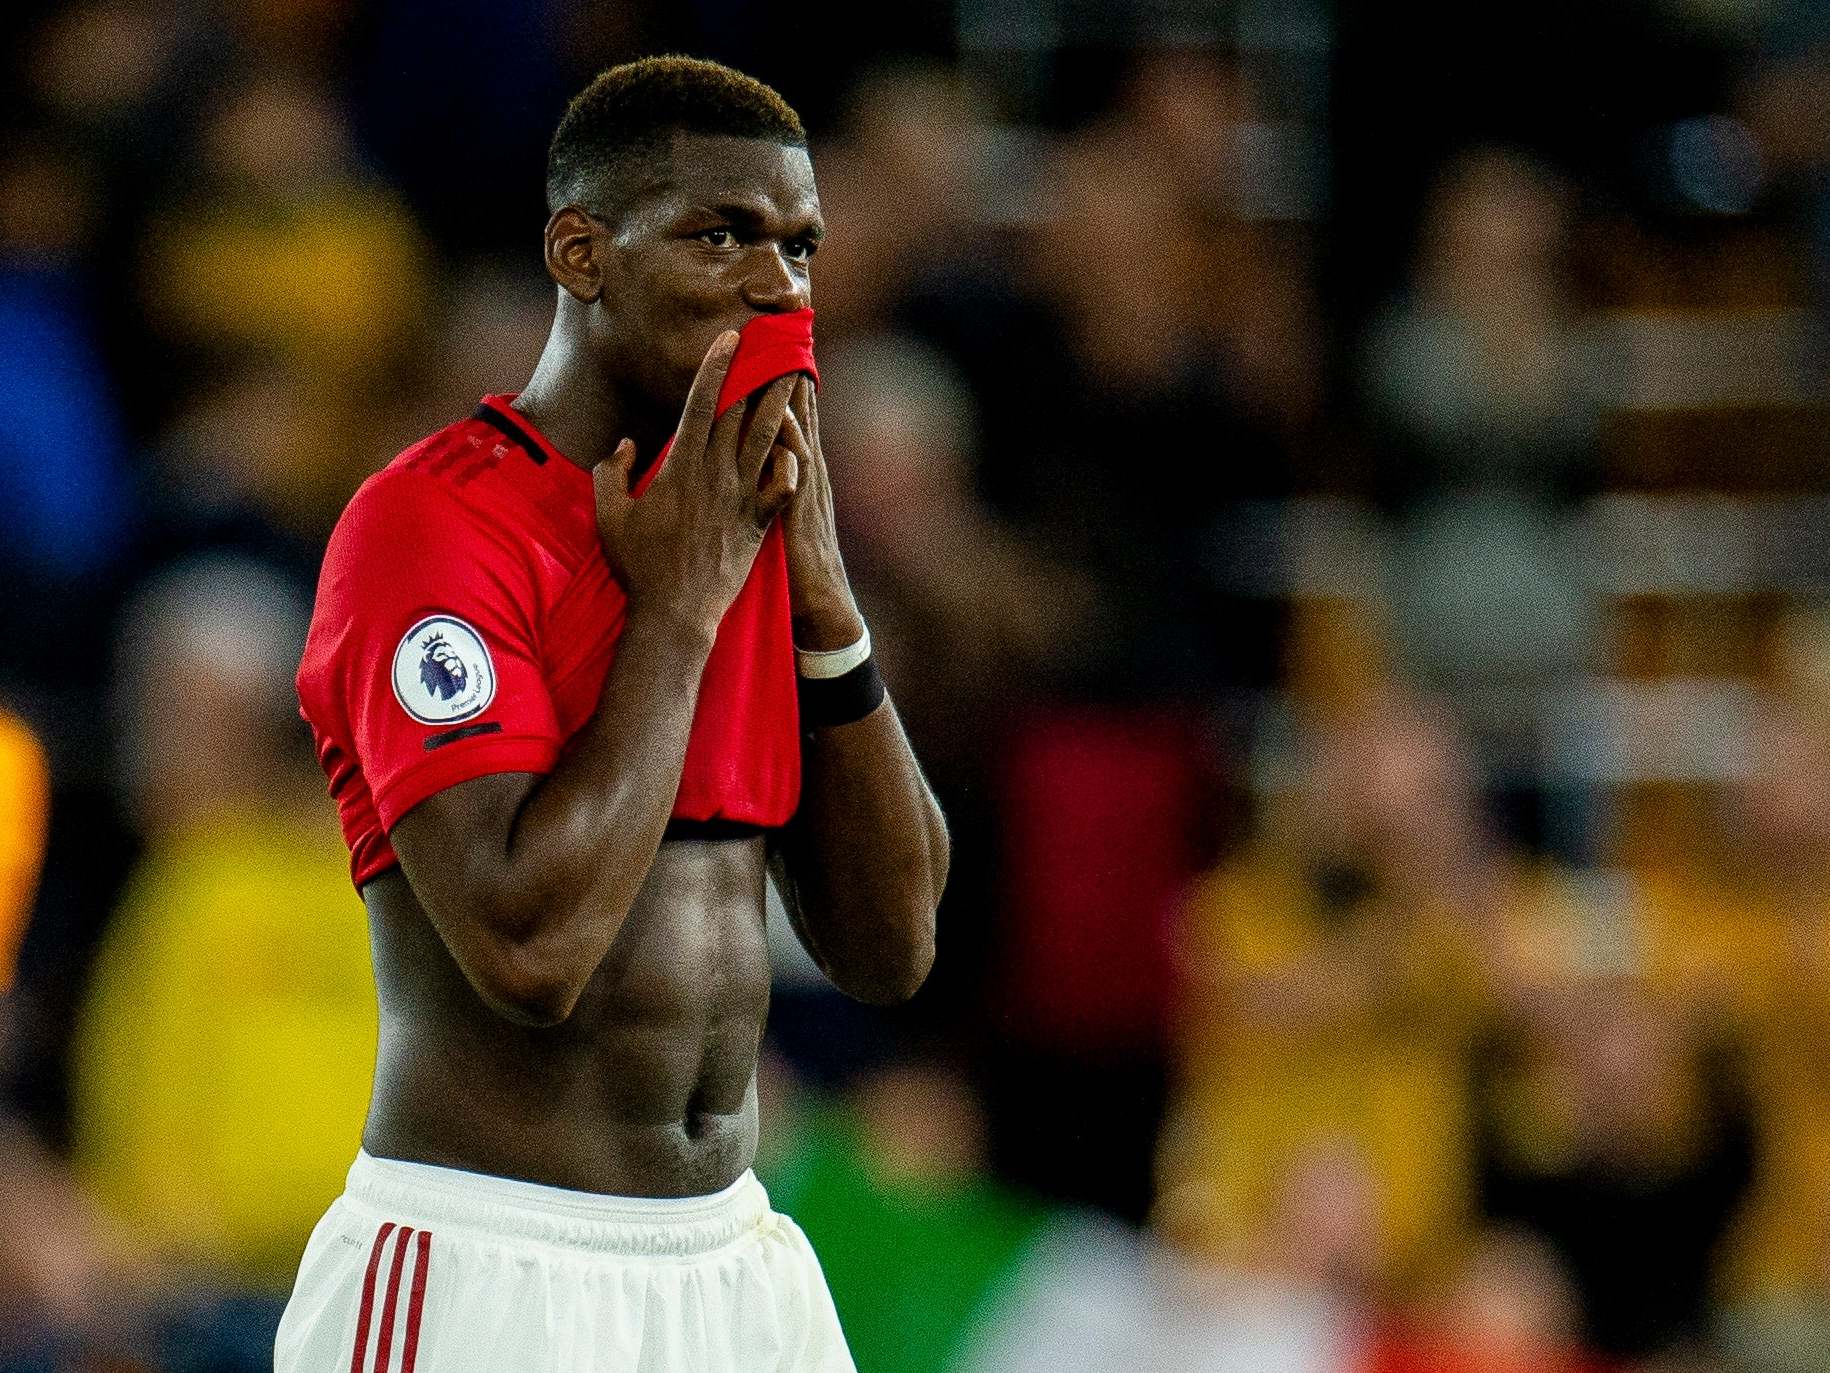 Wolves vs Manchester United: Ole Gunnar Solskjaer clarifies Paul Pogba situation after penalty nightmare